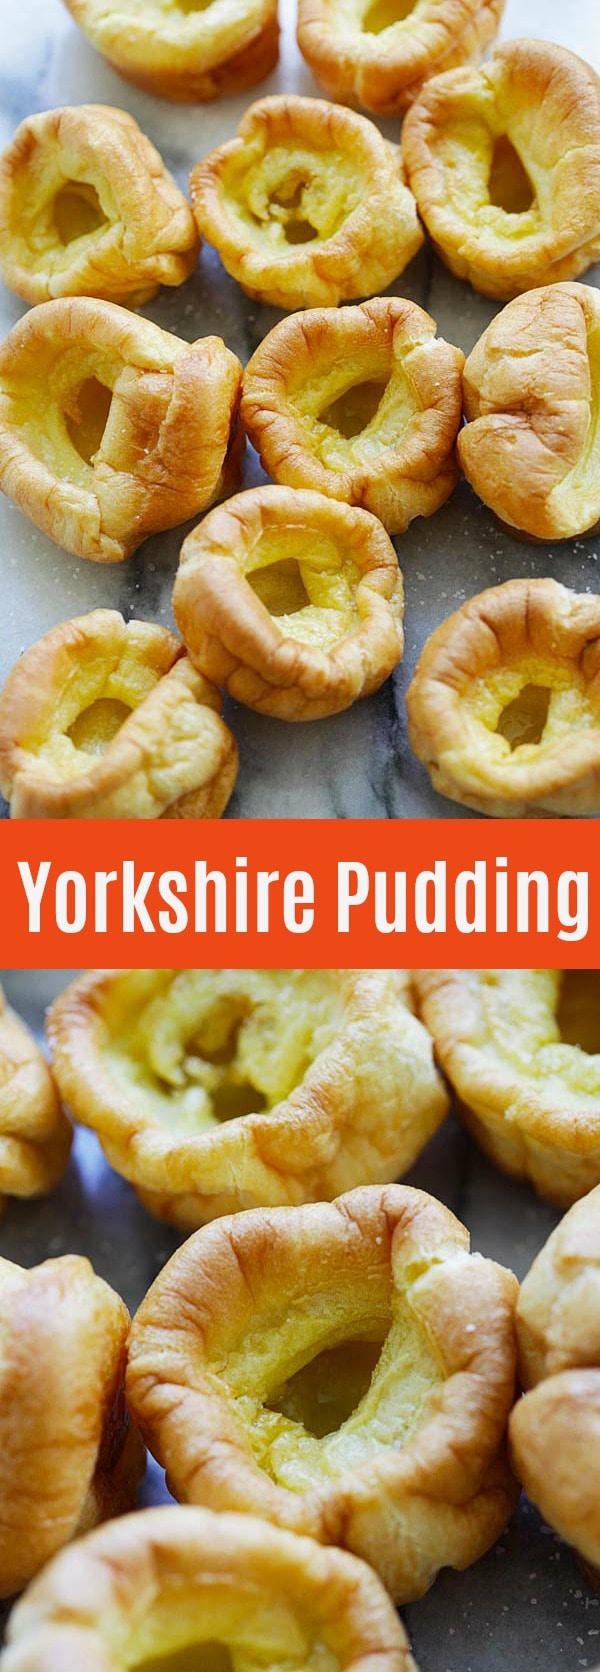 Yorkshire Pudding - fluffy, eggy and delicious pudding baked with a simple batter of eggs, milk and all-purpose flour. Yorkshire pudding is a perfect side dish for any occasions | rasamalaysia.com